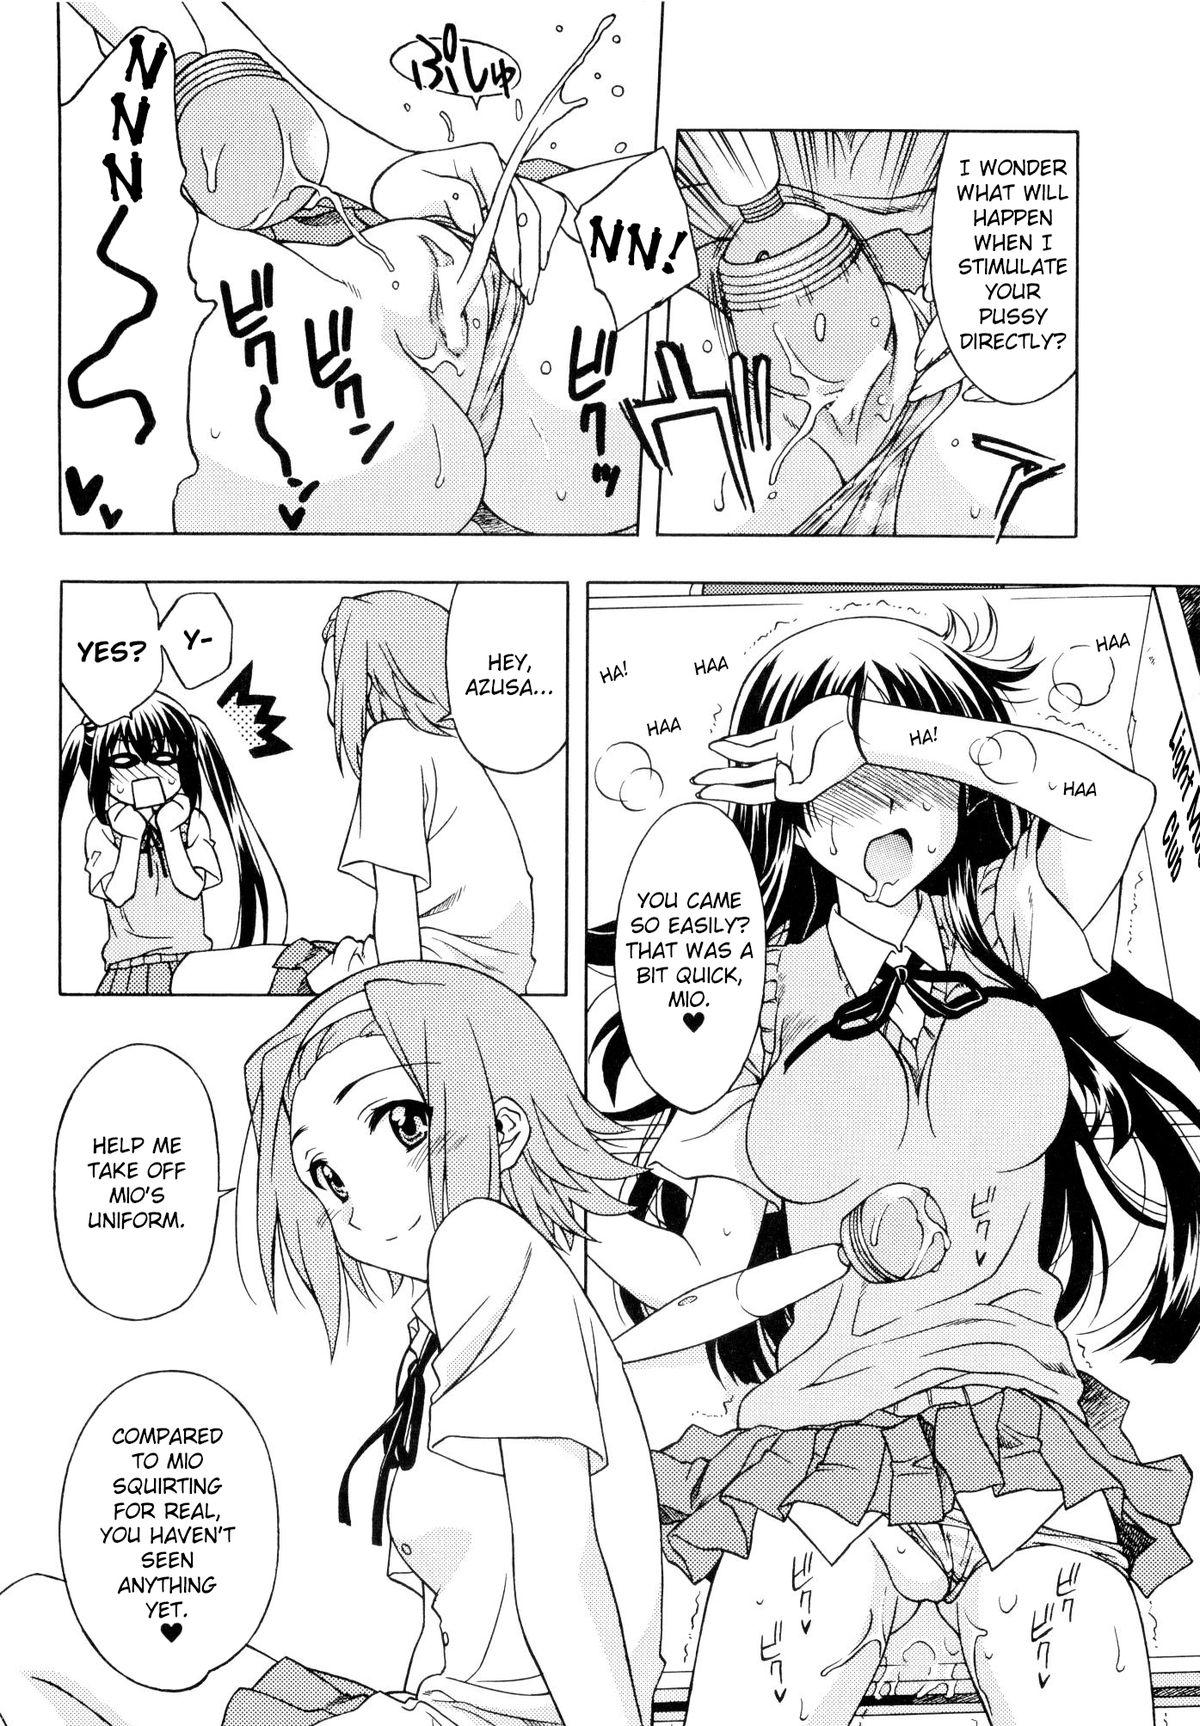 Dicks K-ON! BOX - K-on Shaven - Page 7